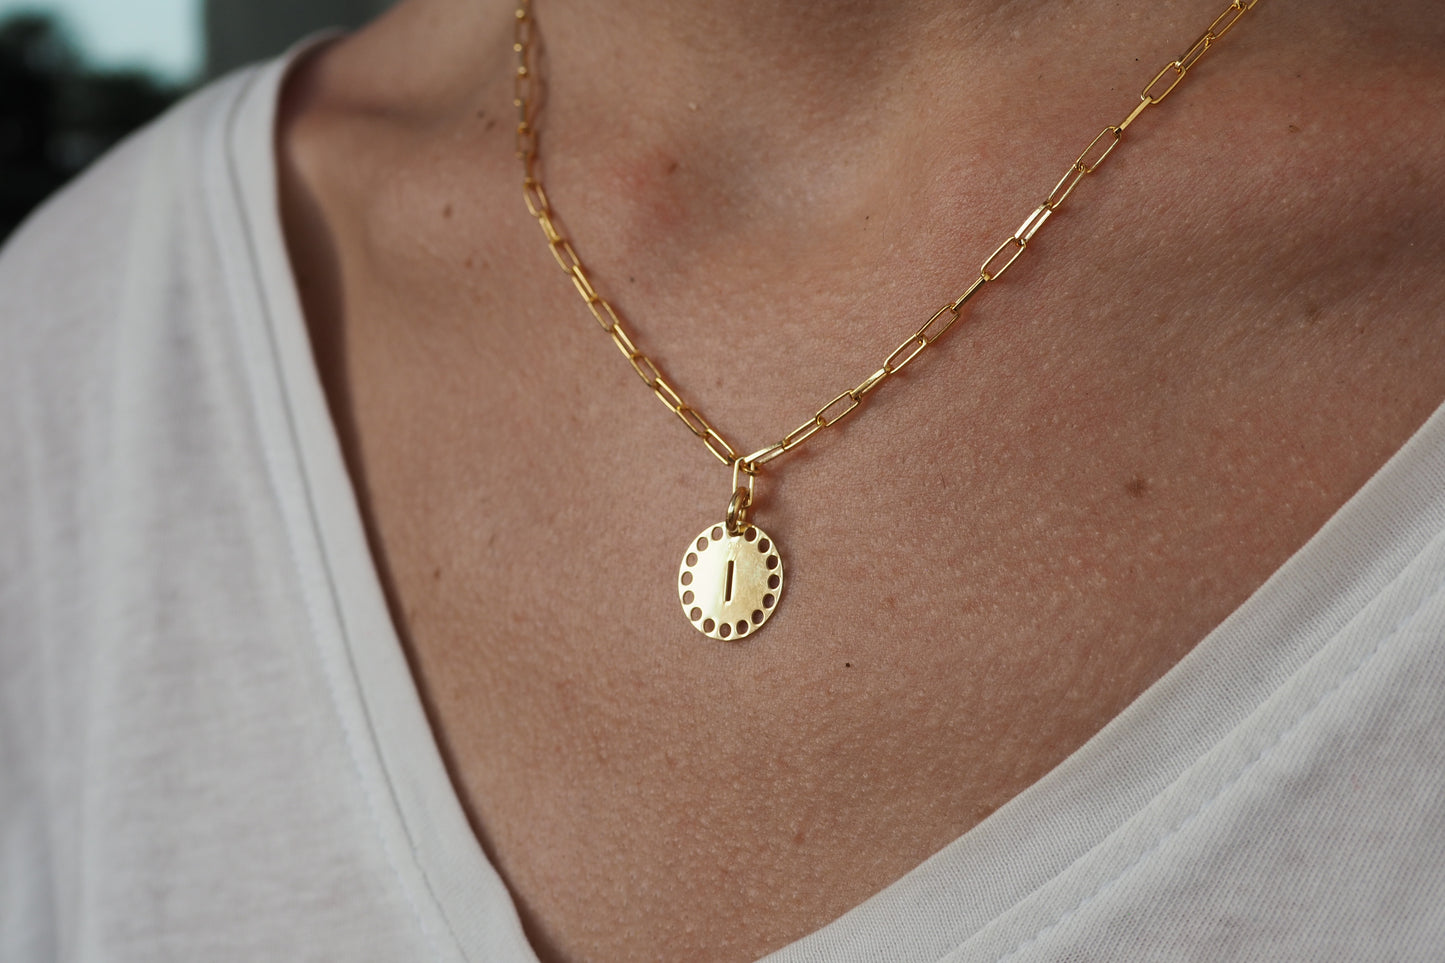 NAME GOLD necklace